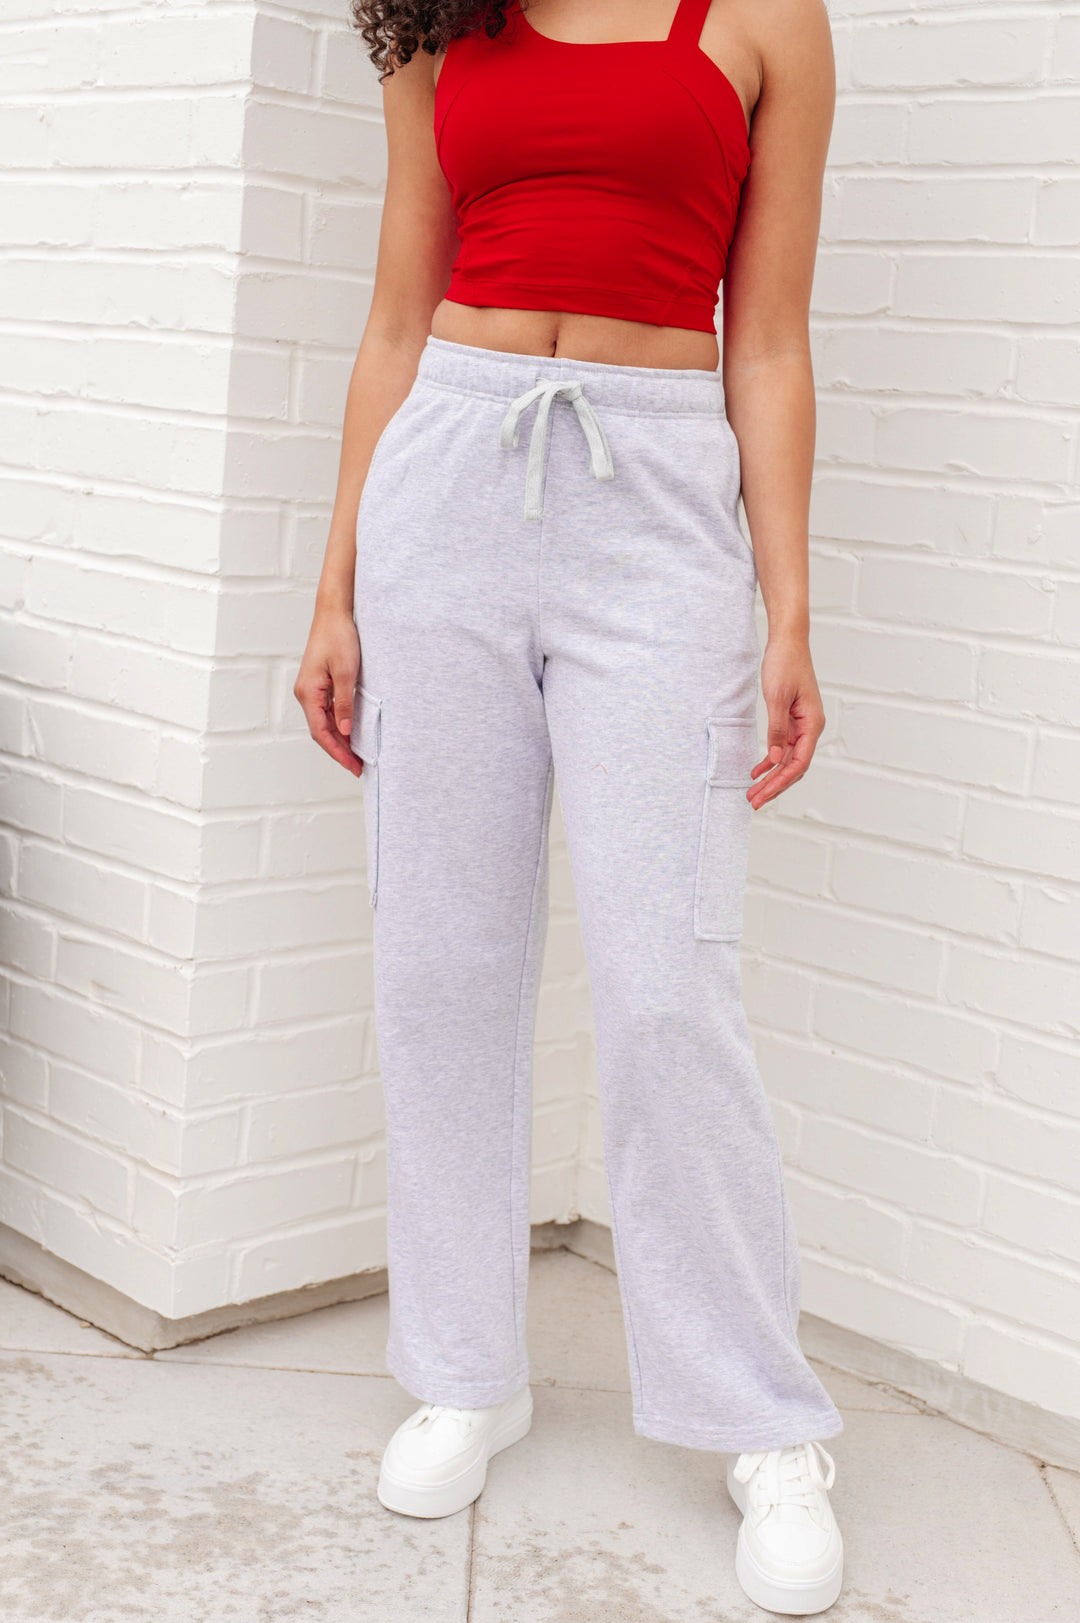 Run, Don't Walk Cargo Sweatpants in Grey-Athleisure-Inspired by Justeen-Women's Clothing Boutique in Chicago, Illinois